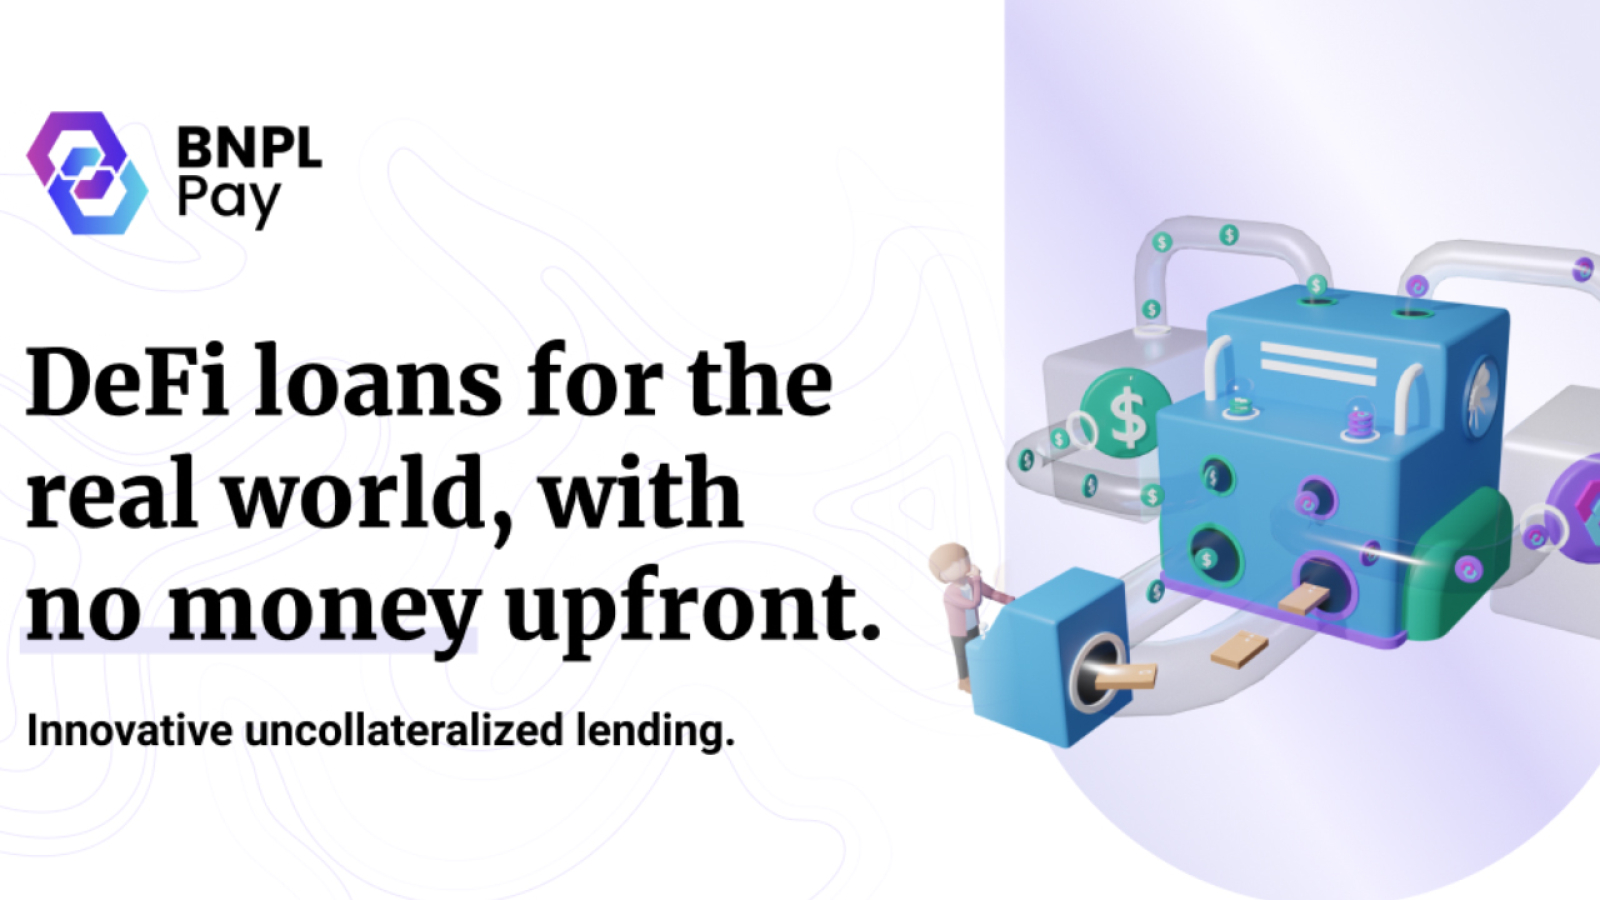 BNPLPay Breaks a New Frontier in DeFi with Uncollateralized Lending